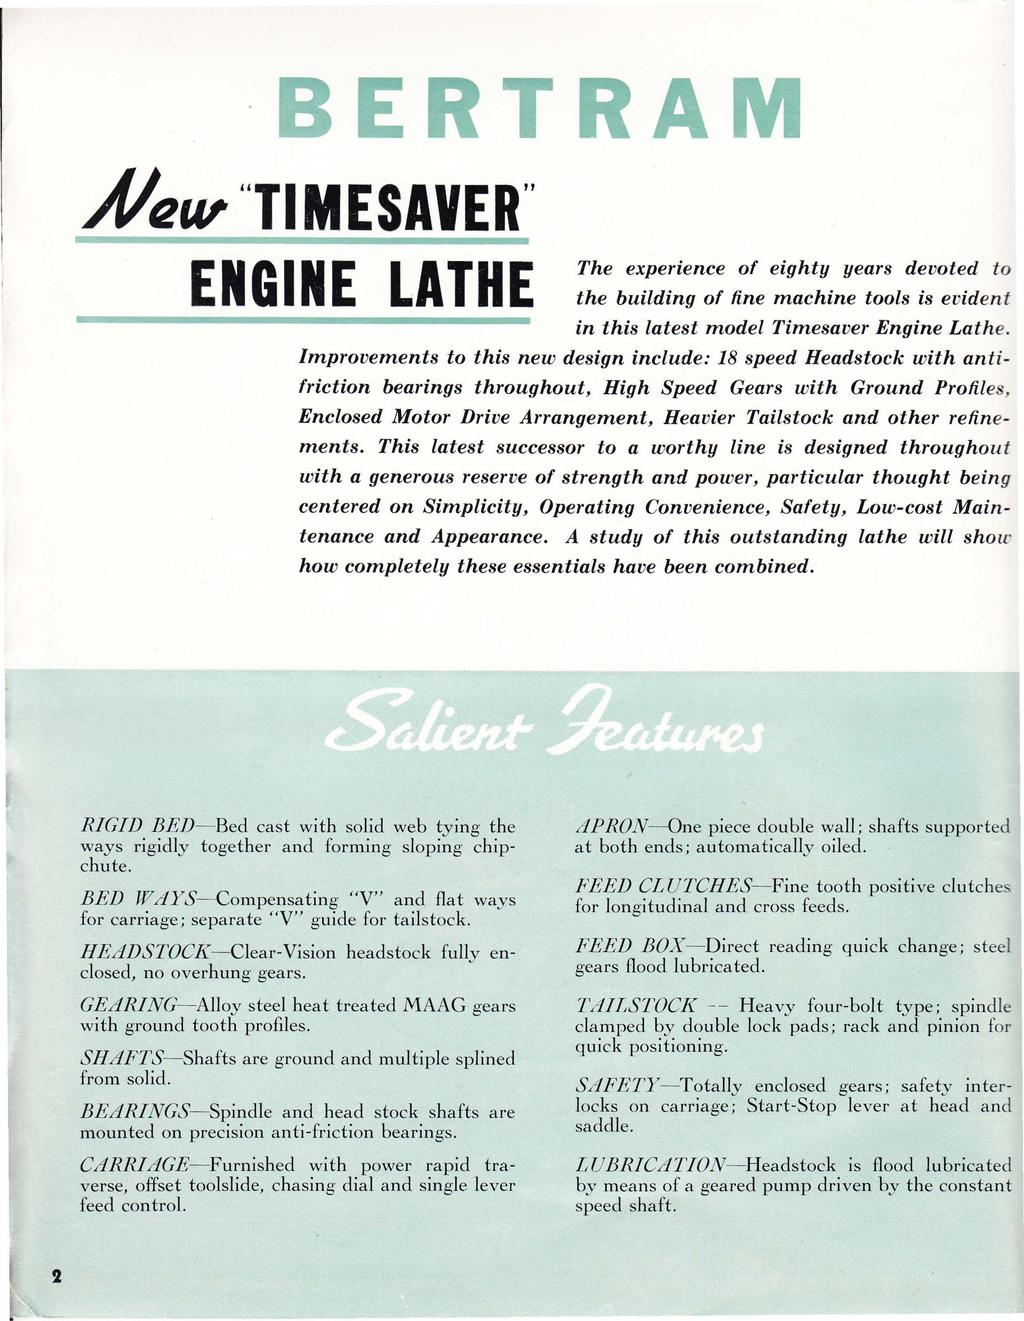 Alflw "TIMESAVER" ERTRAM ENGINE LATHE The experience of eighty years devoted to the building of fine machine tools is evident in this latest model Timesaver Engine Lathe.